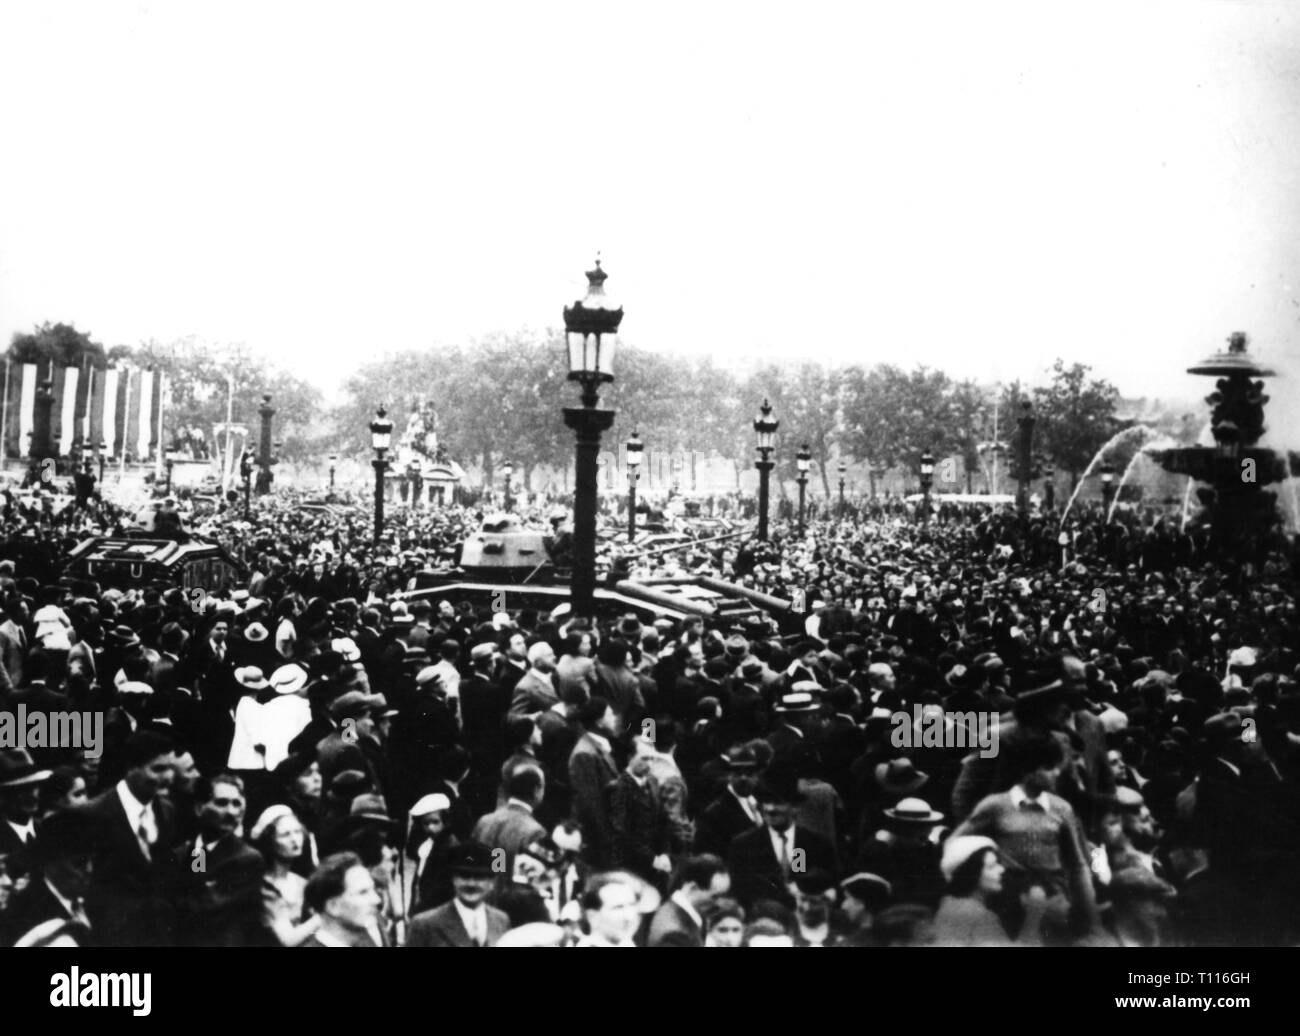 Second World War / WWII, France, occupation period, crowd at the national holiday, Paris, 14.7.1940, Additional-Rights-Clearance-Info-Not-Available Stock Photo